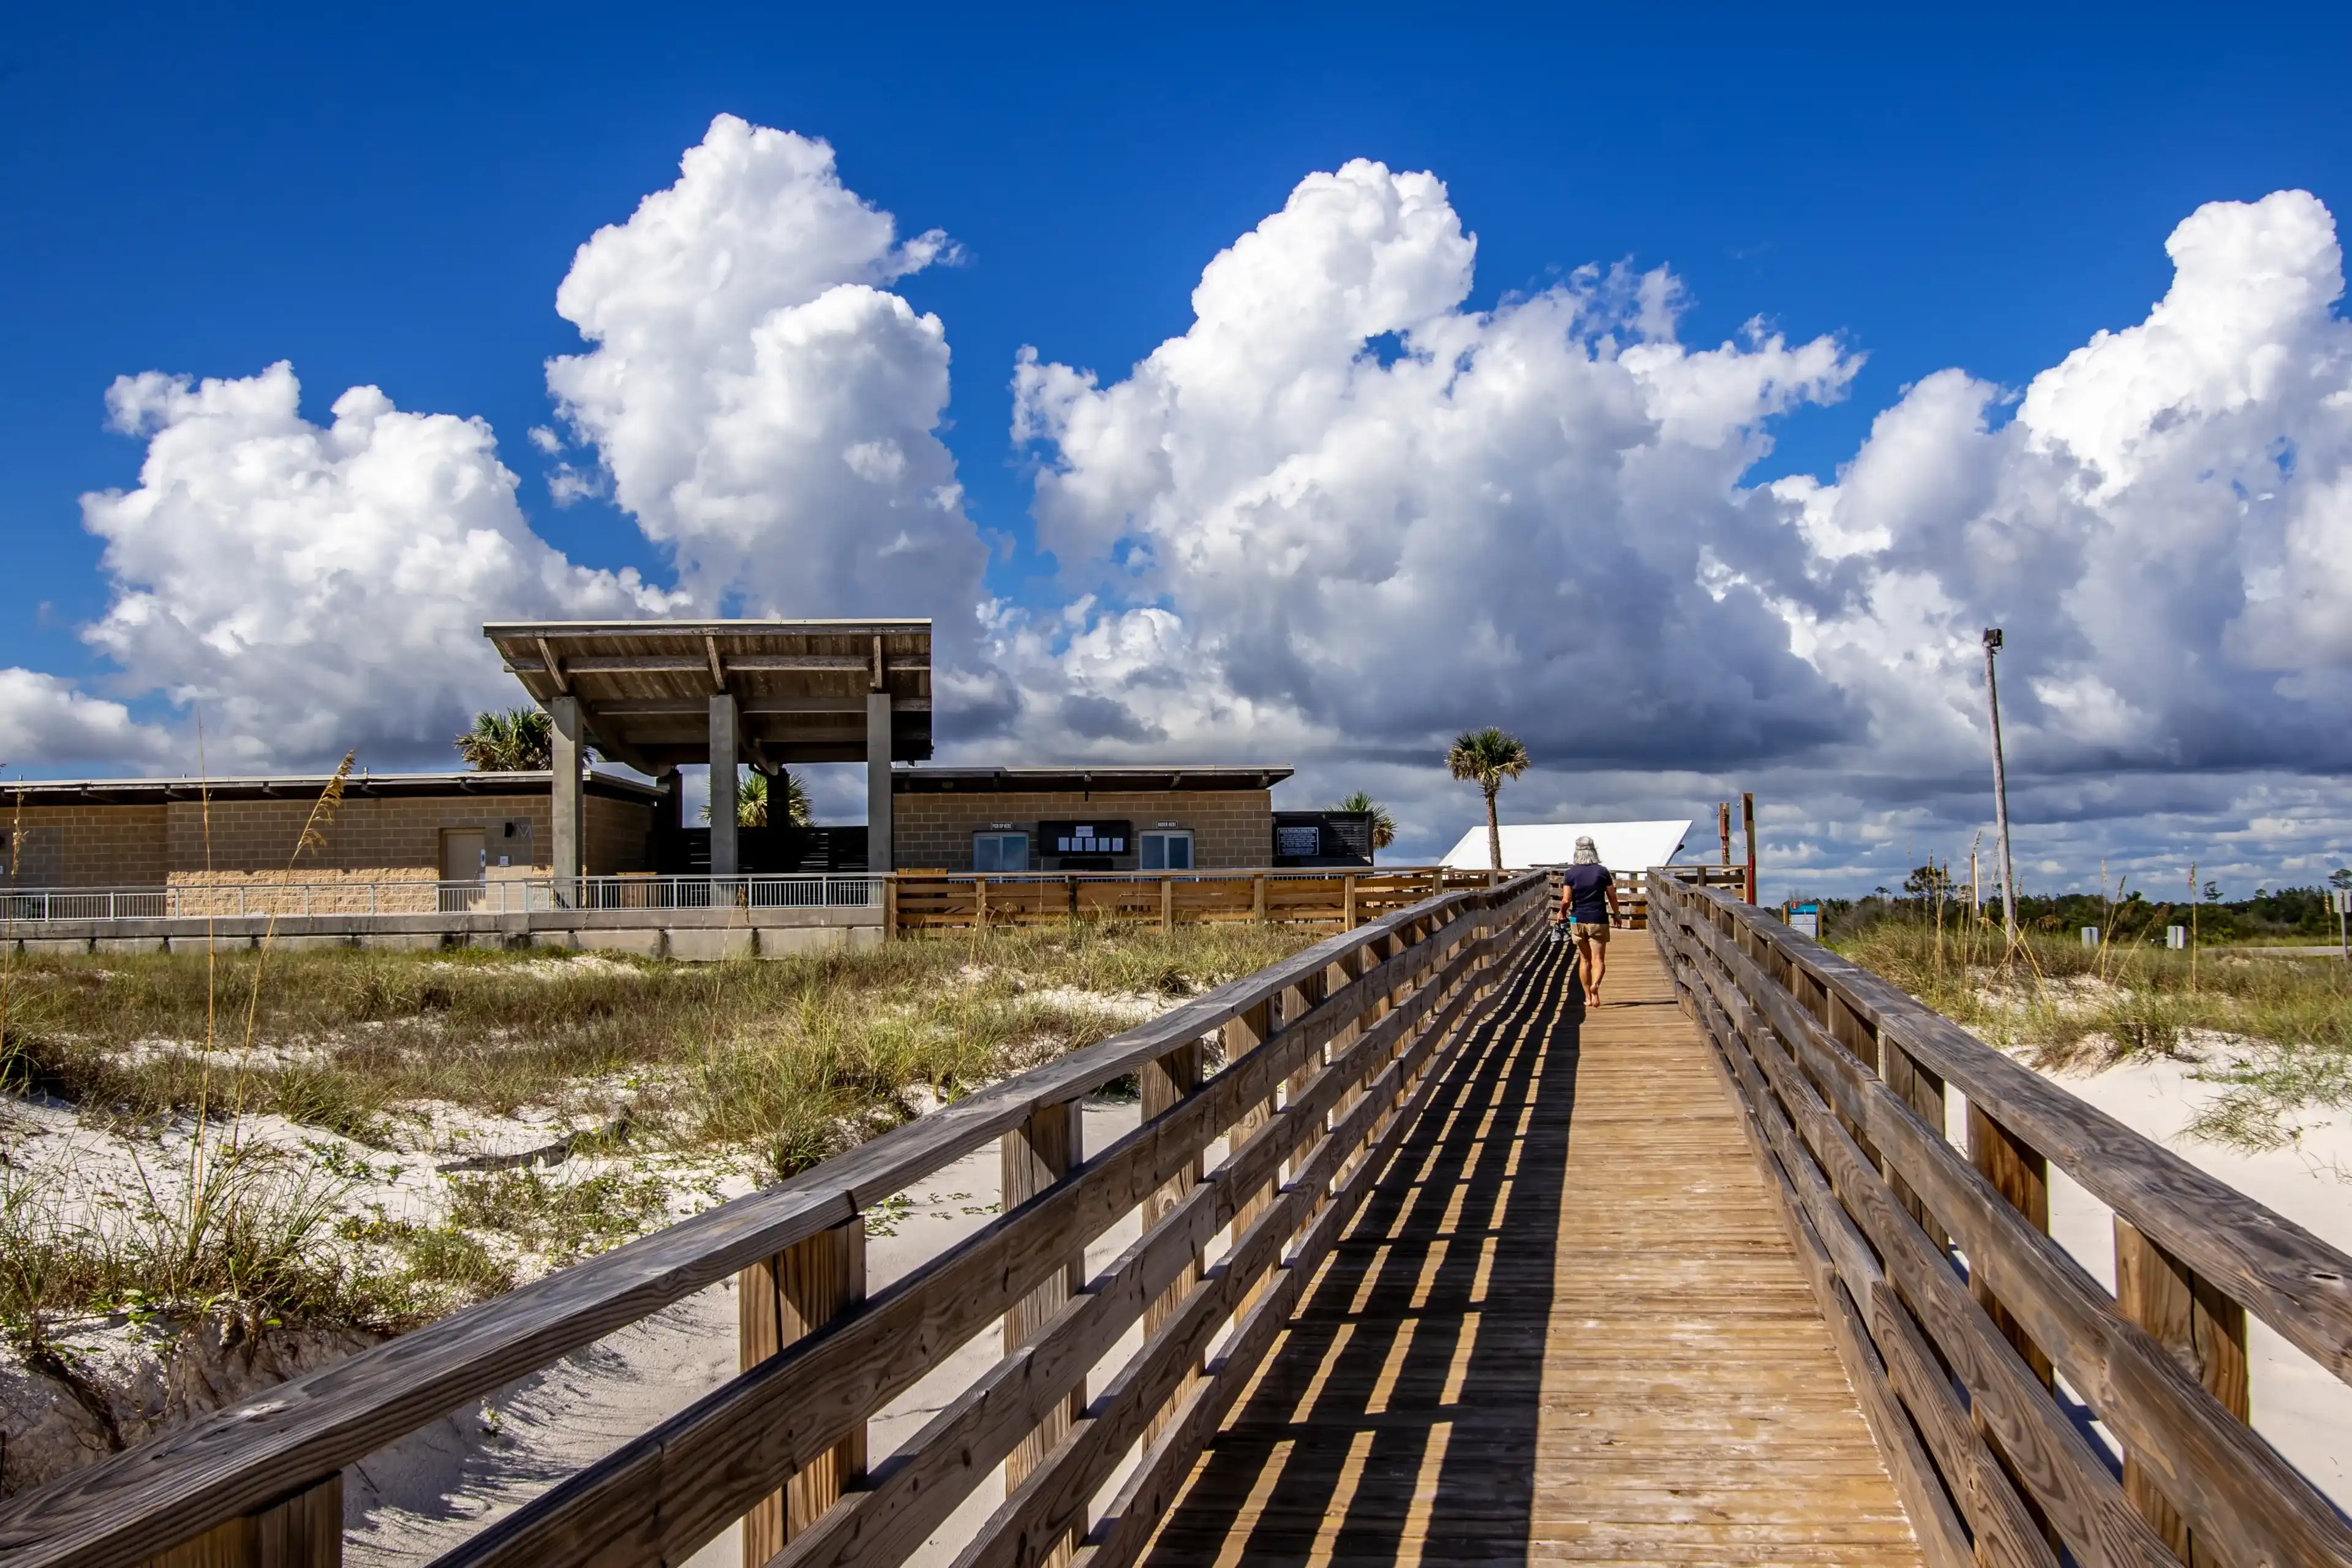 Best Gulf Shores hotels. Cheap hotels in Gulf Shores, Alabama, United States